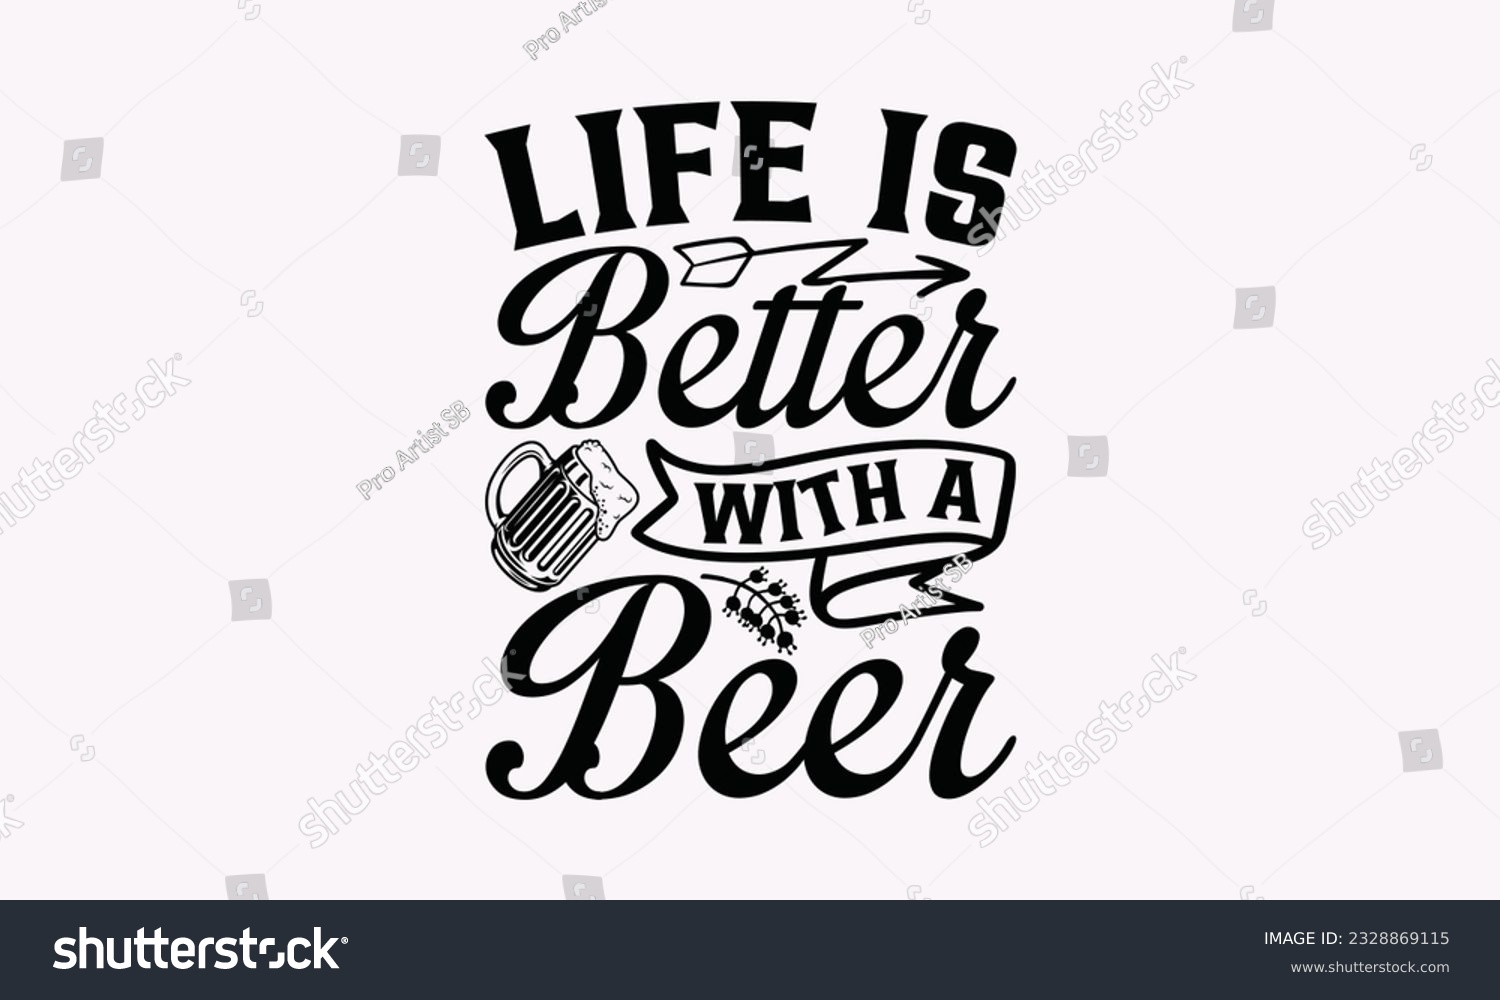 SVG of Life Is A Better With A Beer - Alcohol SVG Design, Cheer Quotes, Hand drawn lettering phrase, Isolated on white background. svg